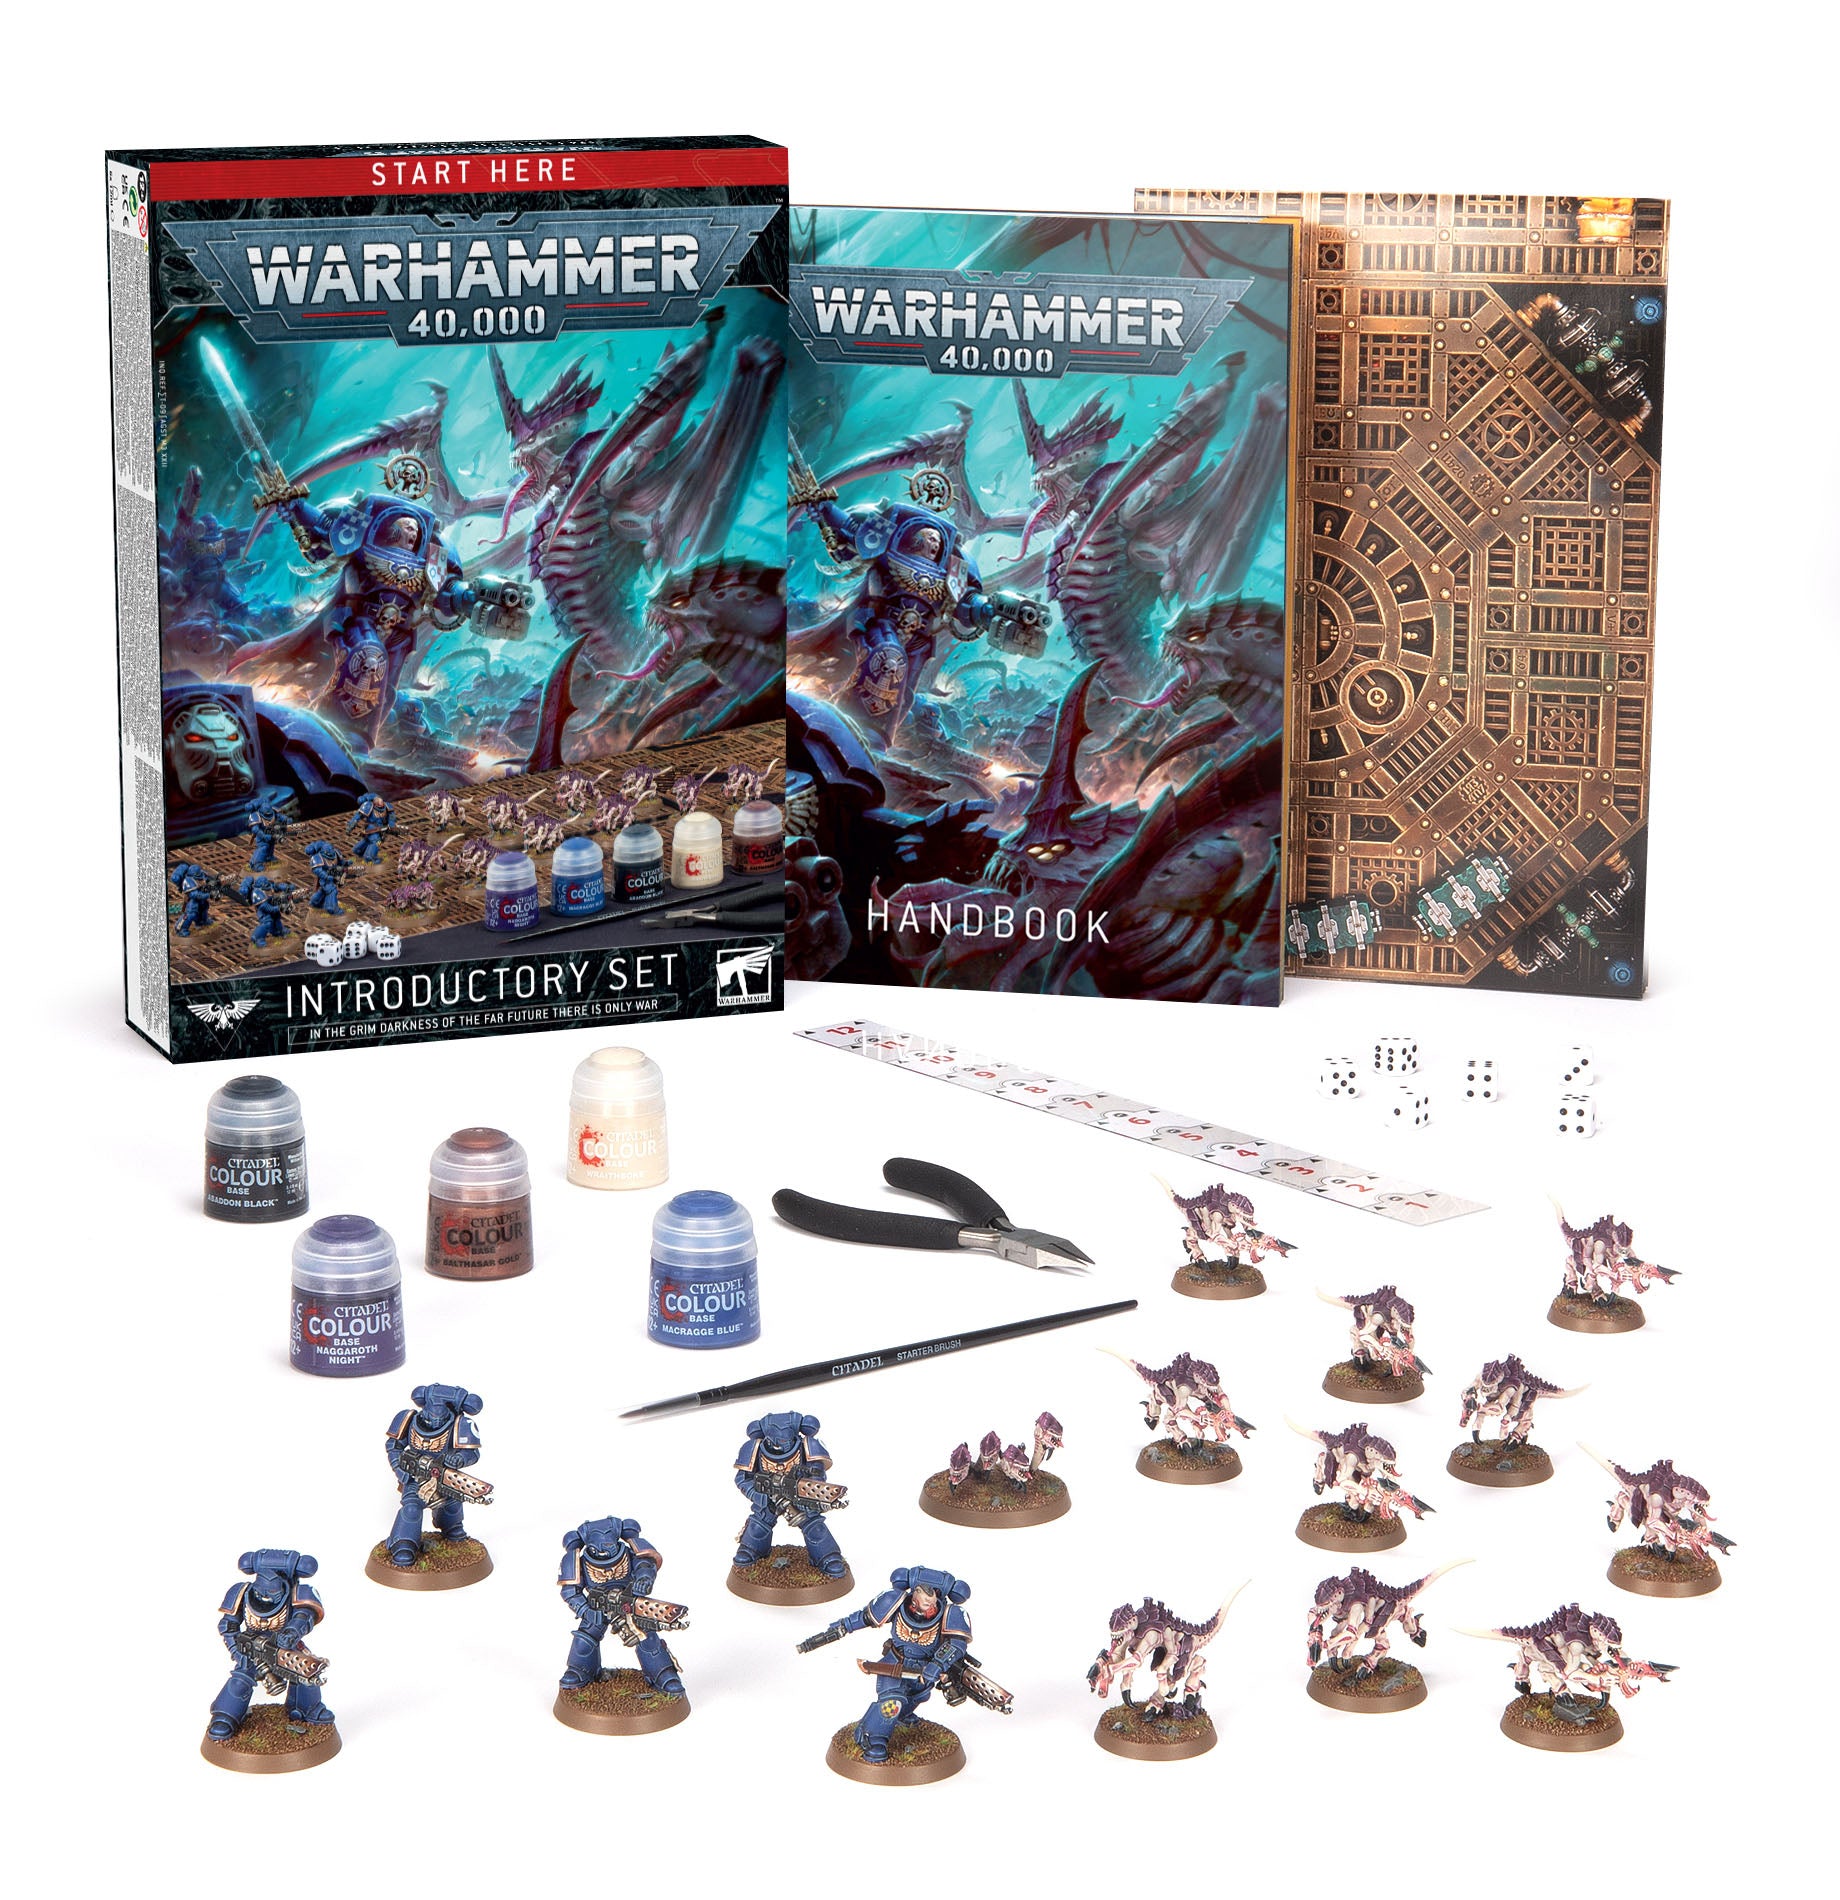 a box of warhammer miniatures and a game set